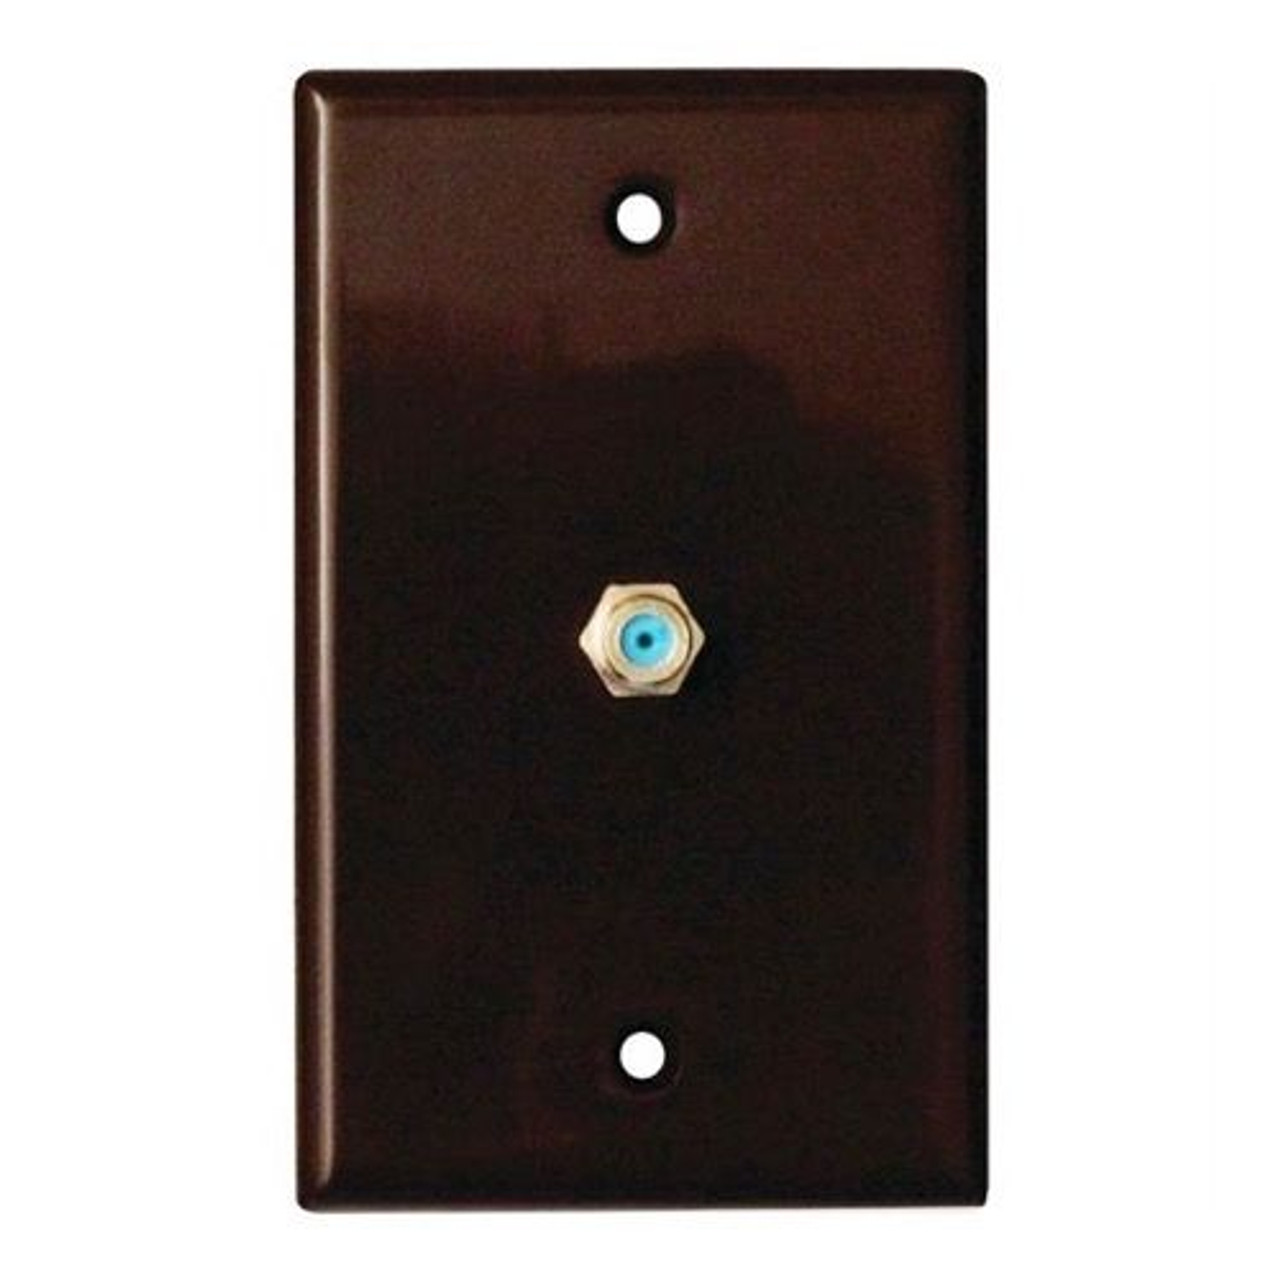 Eagle F Type Wall Plate F-81 Brown 3 GHz Coaxial High Frequency Video Brown High Frequency Satellite F81 Coaxial Cable Video Connection TV Antenna Signal Flush Mount with 75 Ohm Barrel Plug HF Jack, Part # DTVWP-81WB